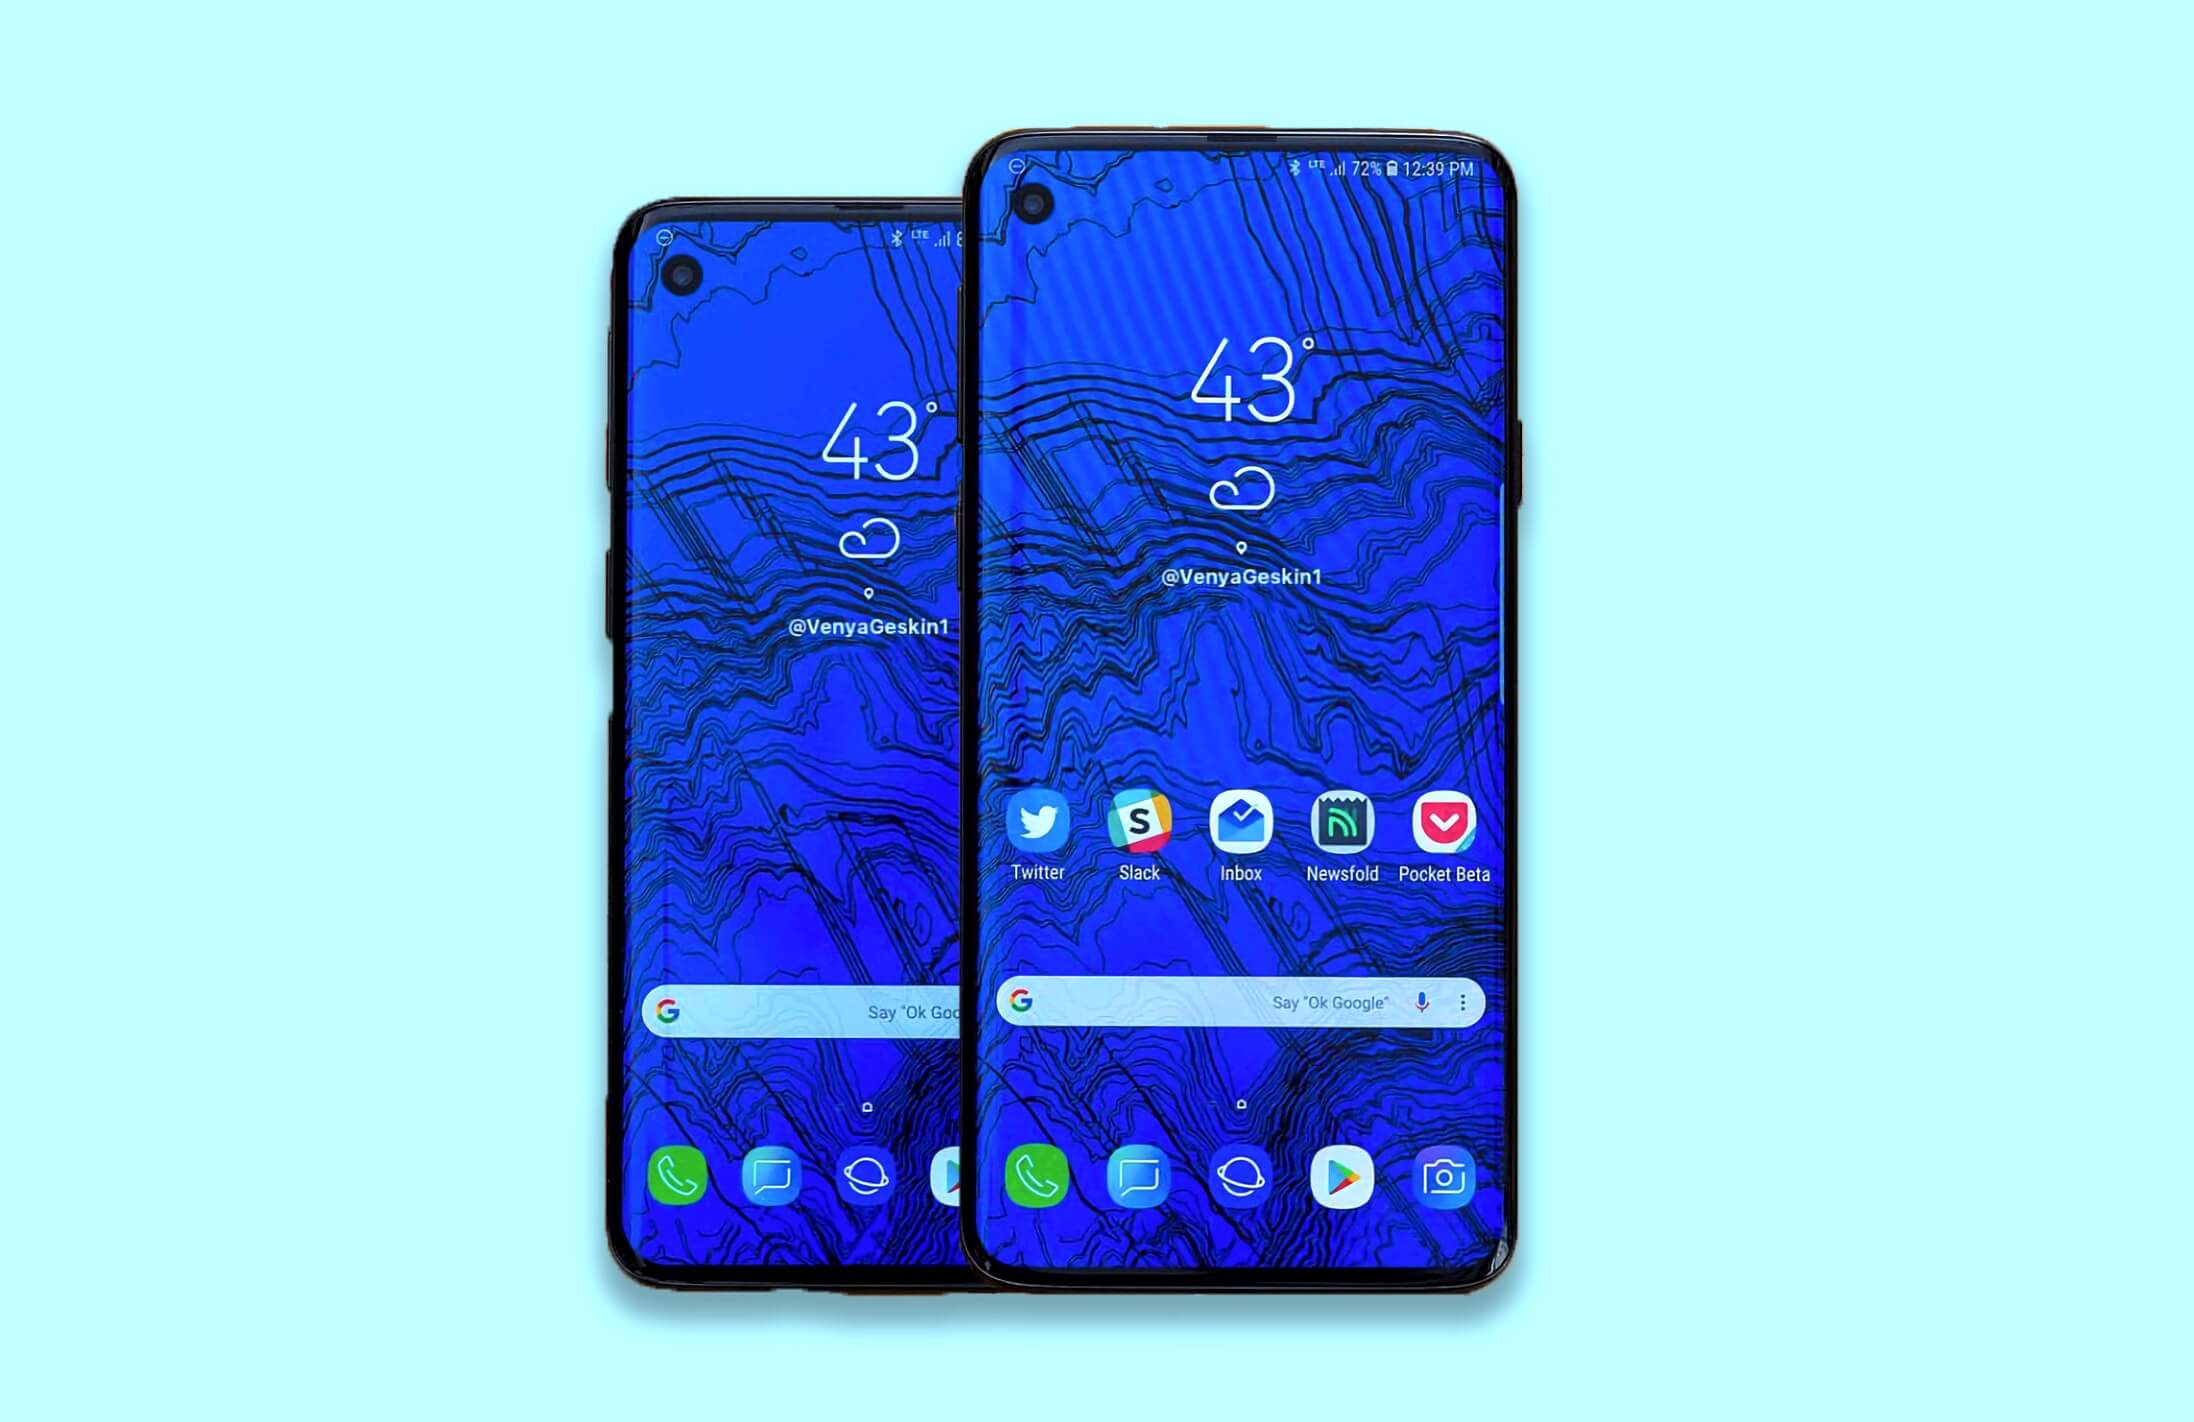 Hole punch: This may be the first real look at the Samsung Galaxy S10